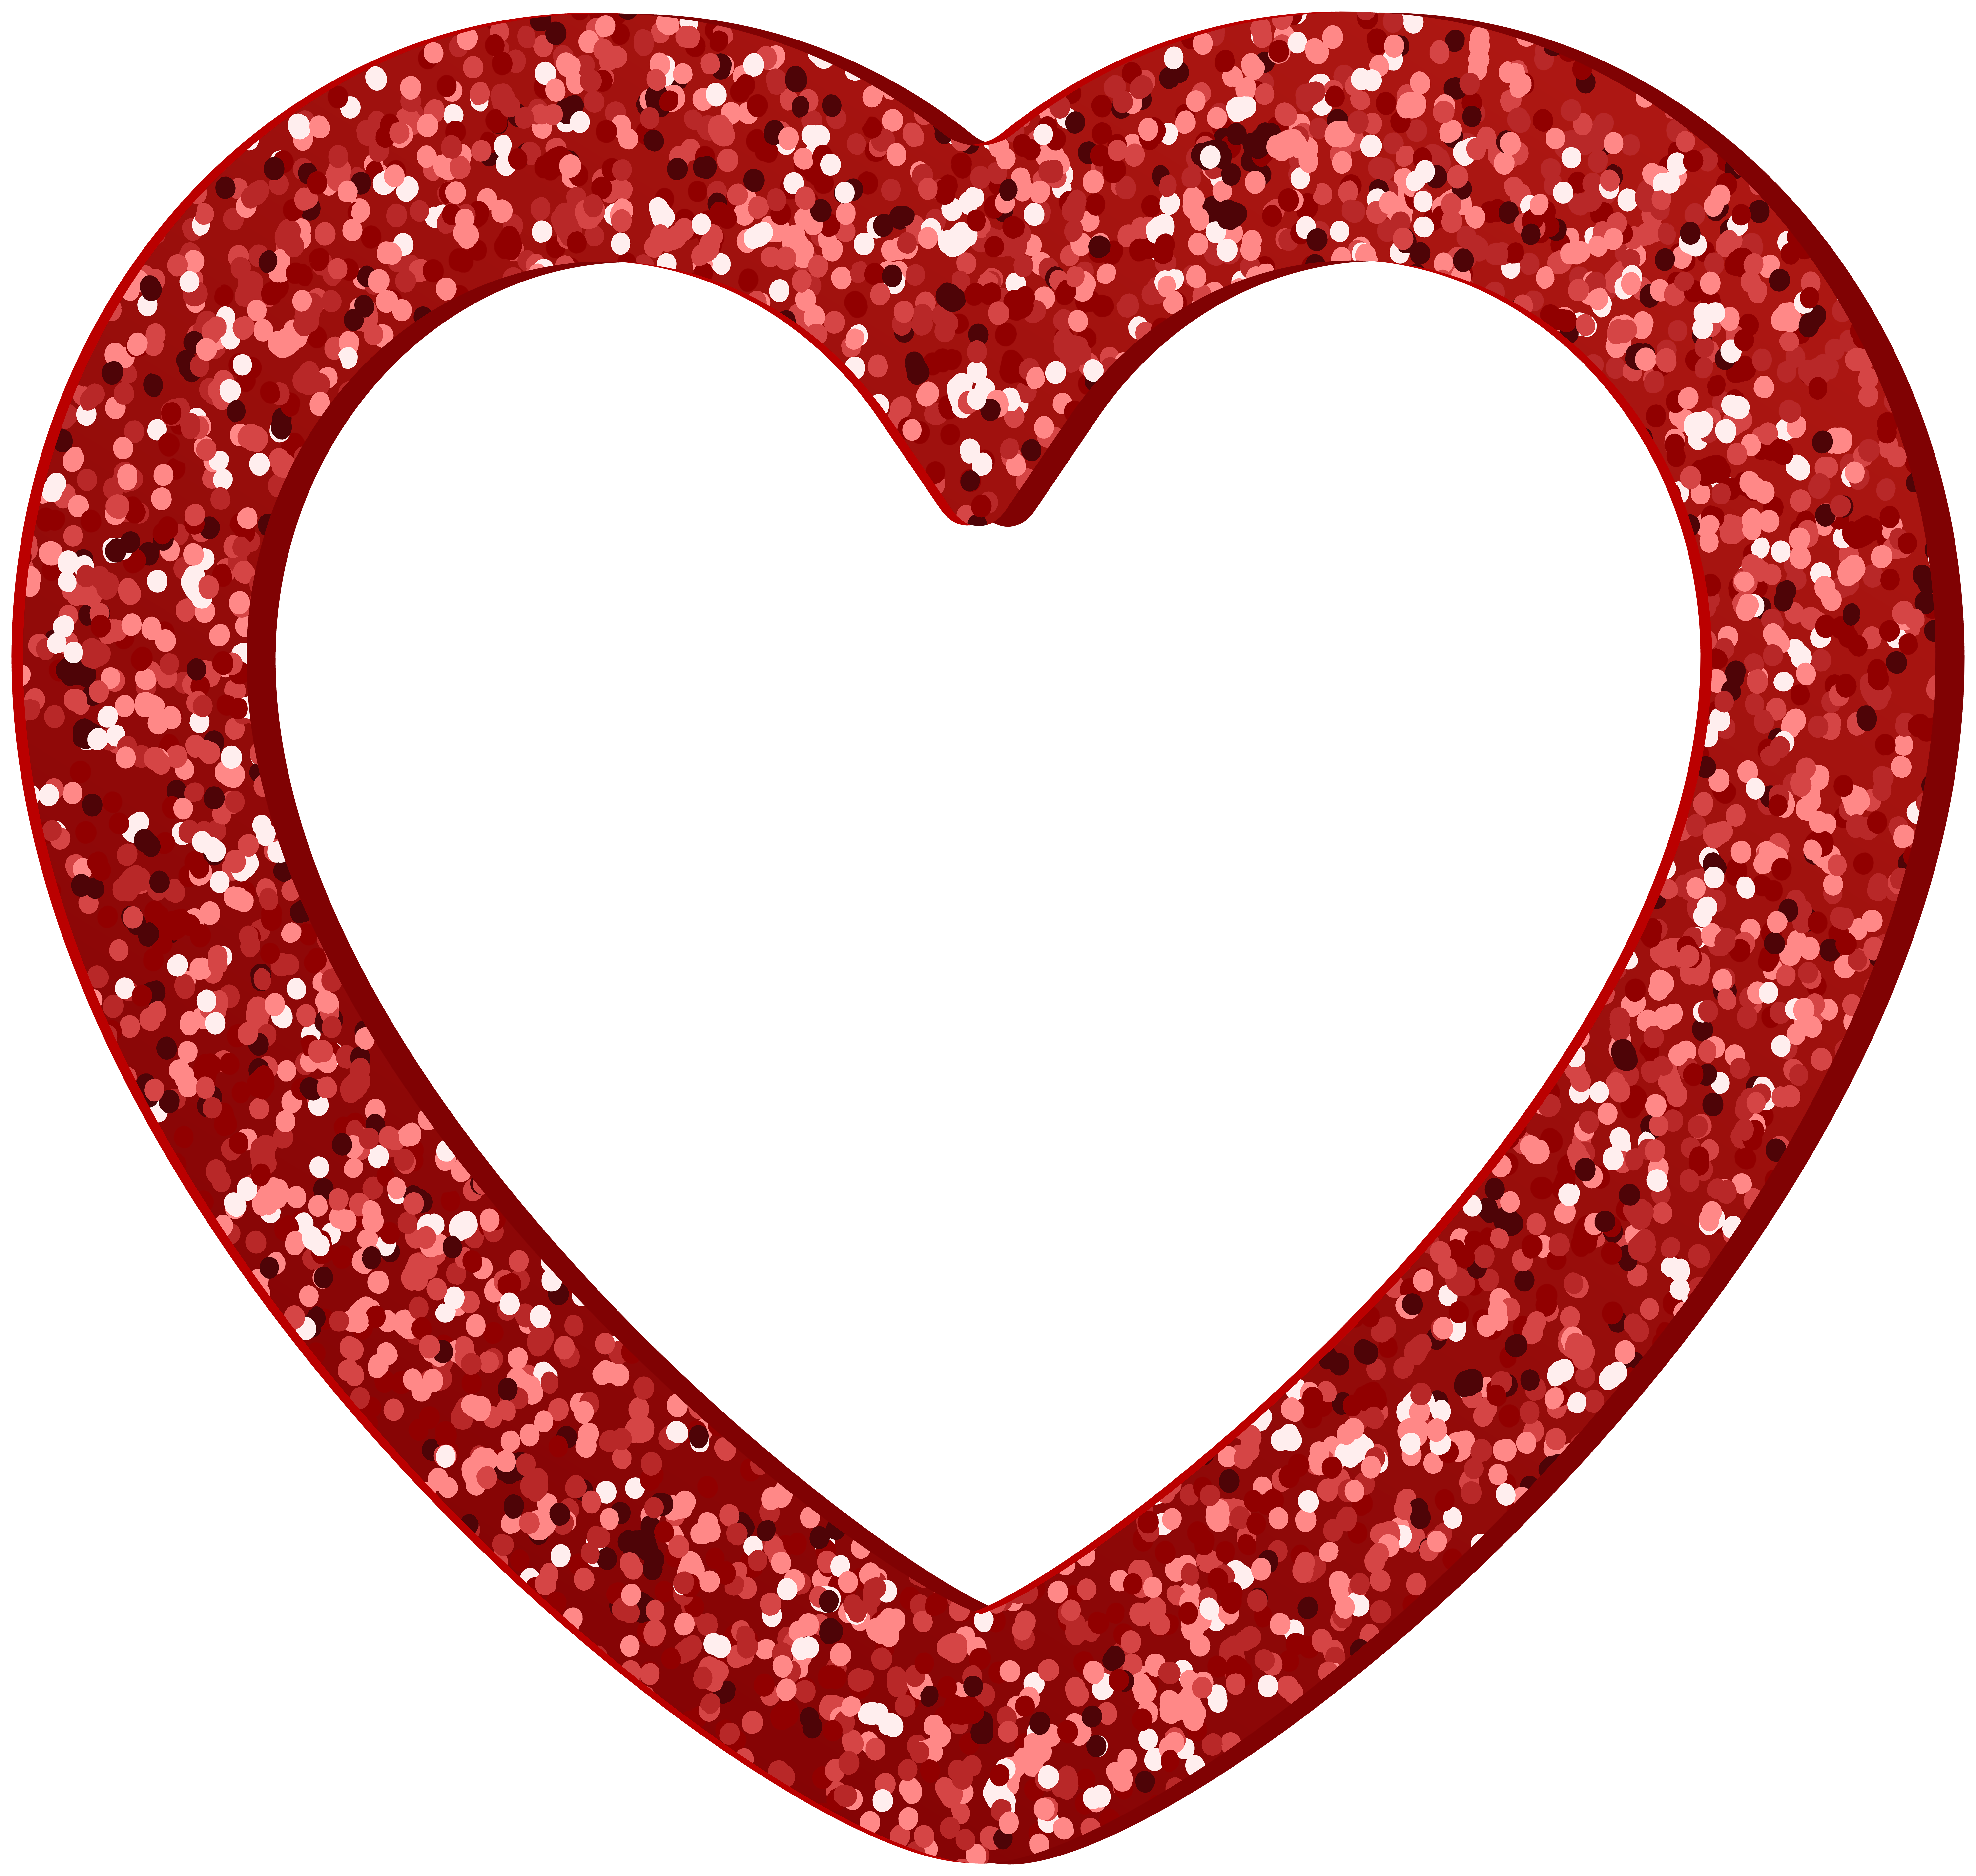 Red Glitter Heart Border Frame Gallery Yopriceville High Quality Images And Transparent Png Free Clipart